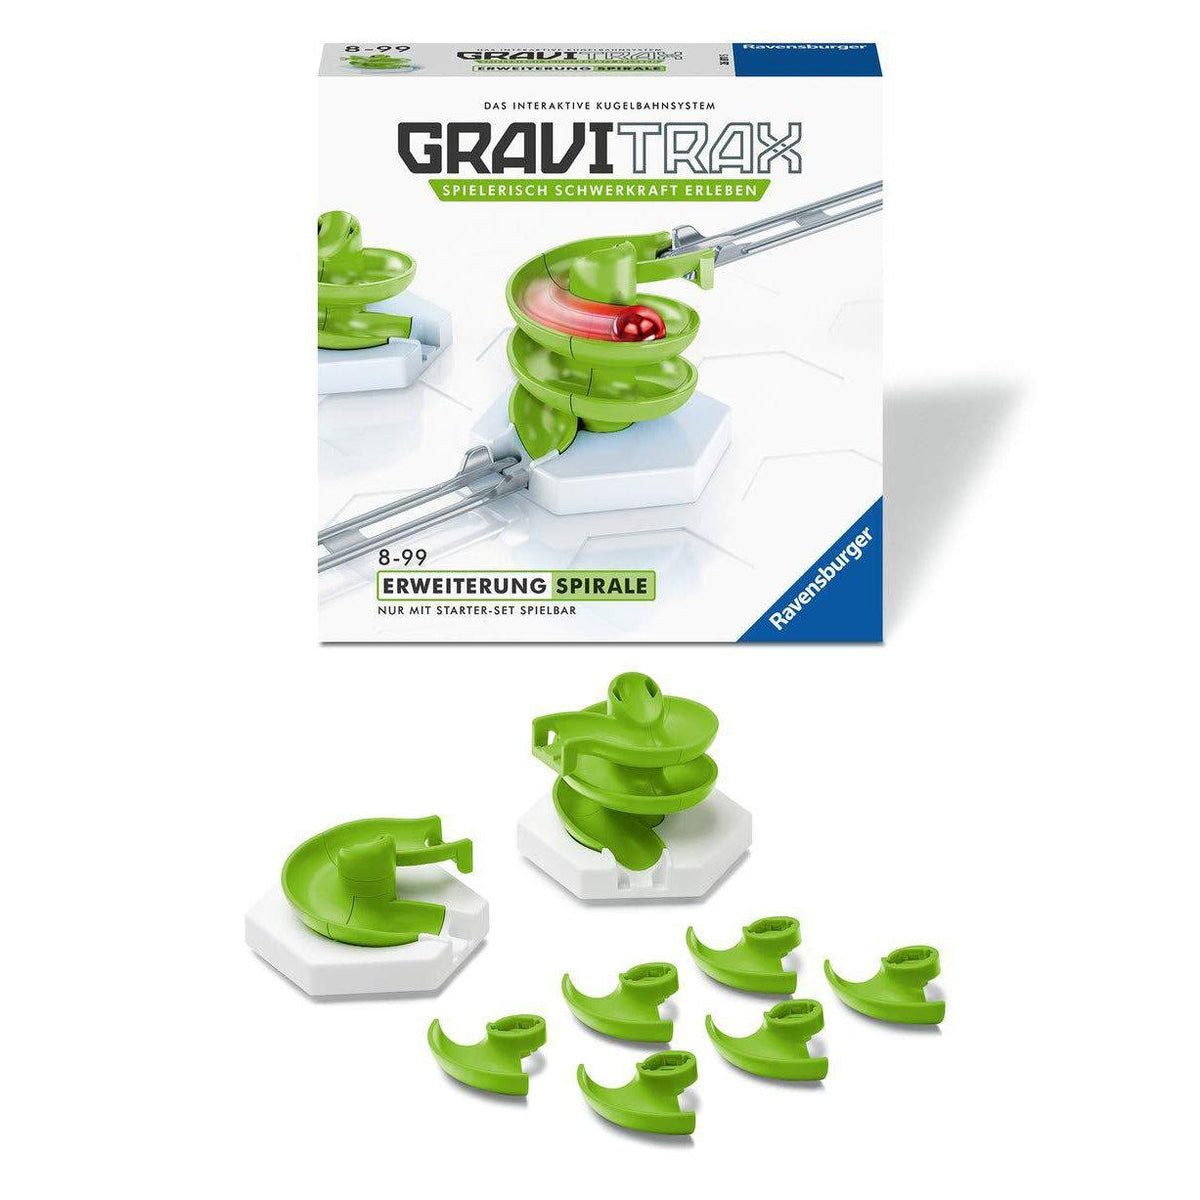 GraviTrax: Spirale (Expansion Set)-Building &amp; Construction-Ravensburger-Brio-Yellow Springs Toy Company